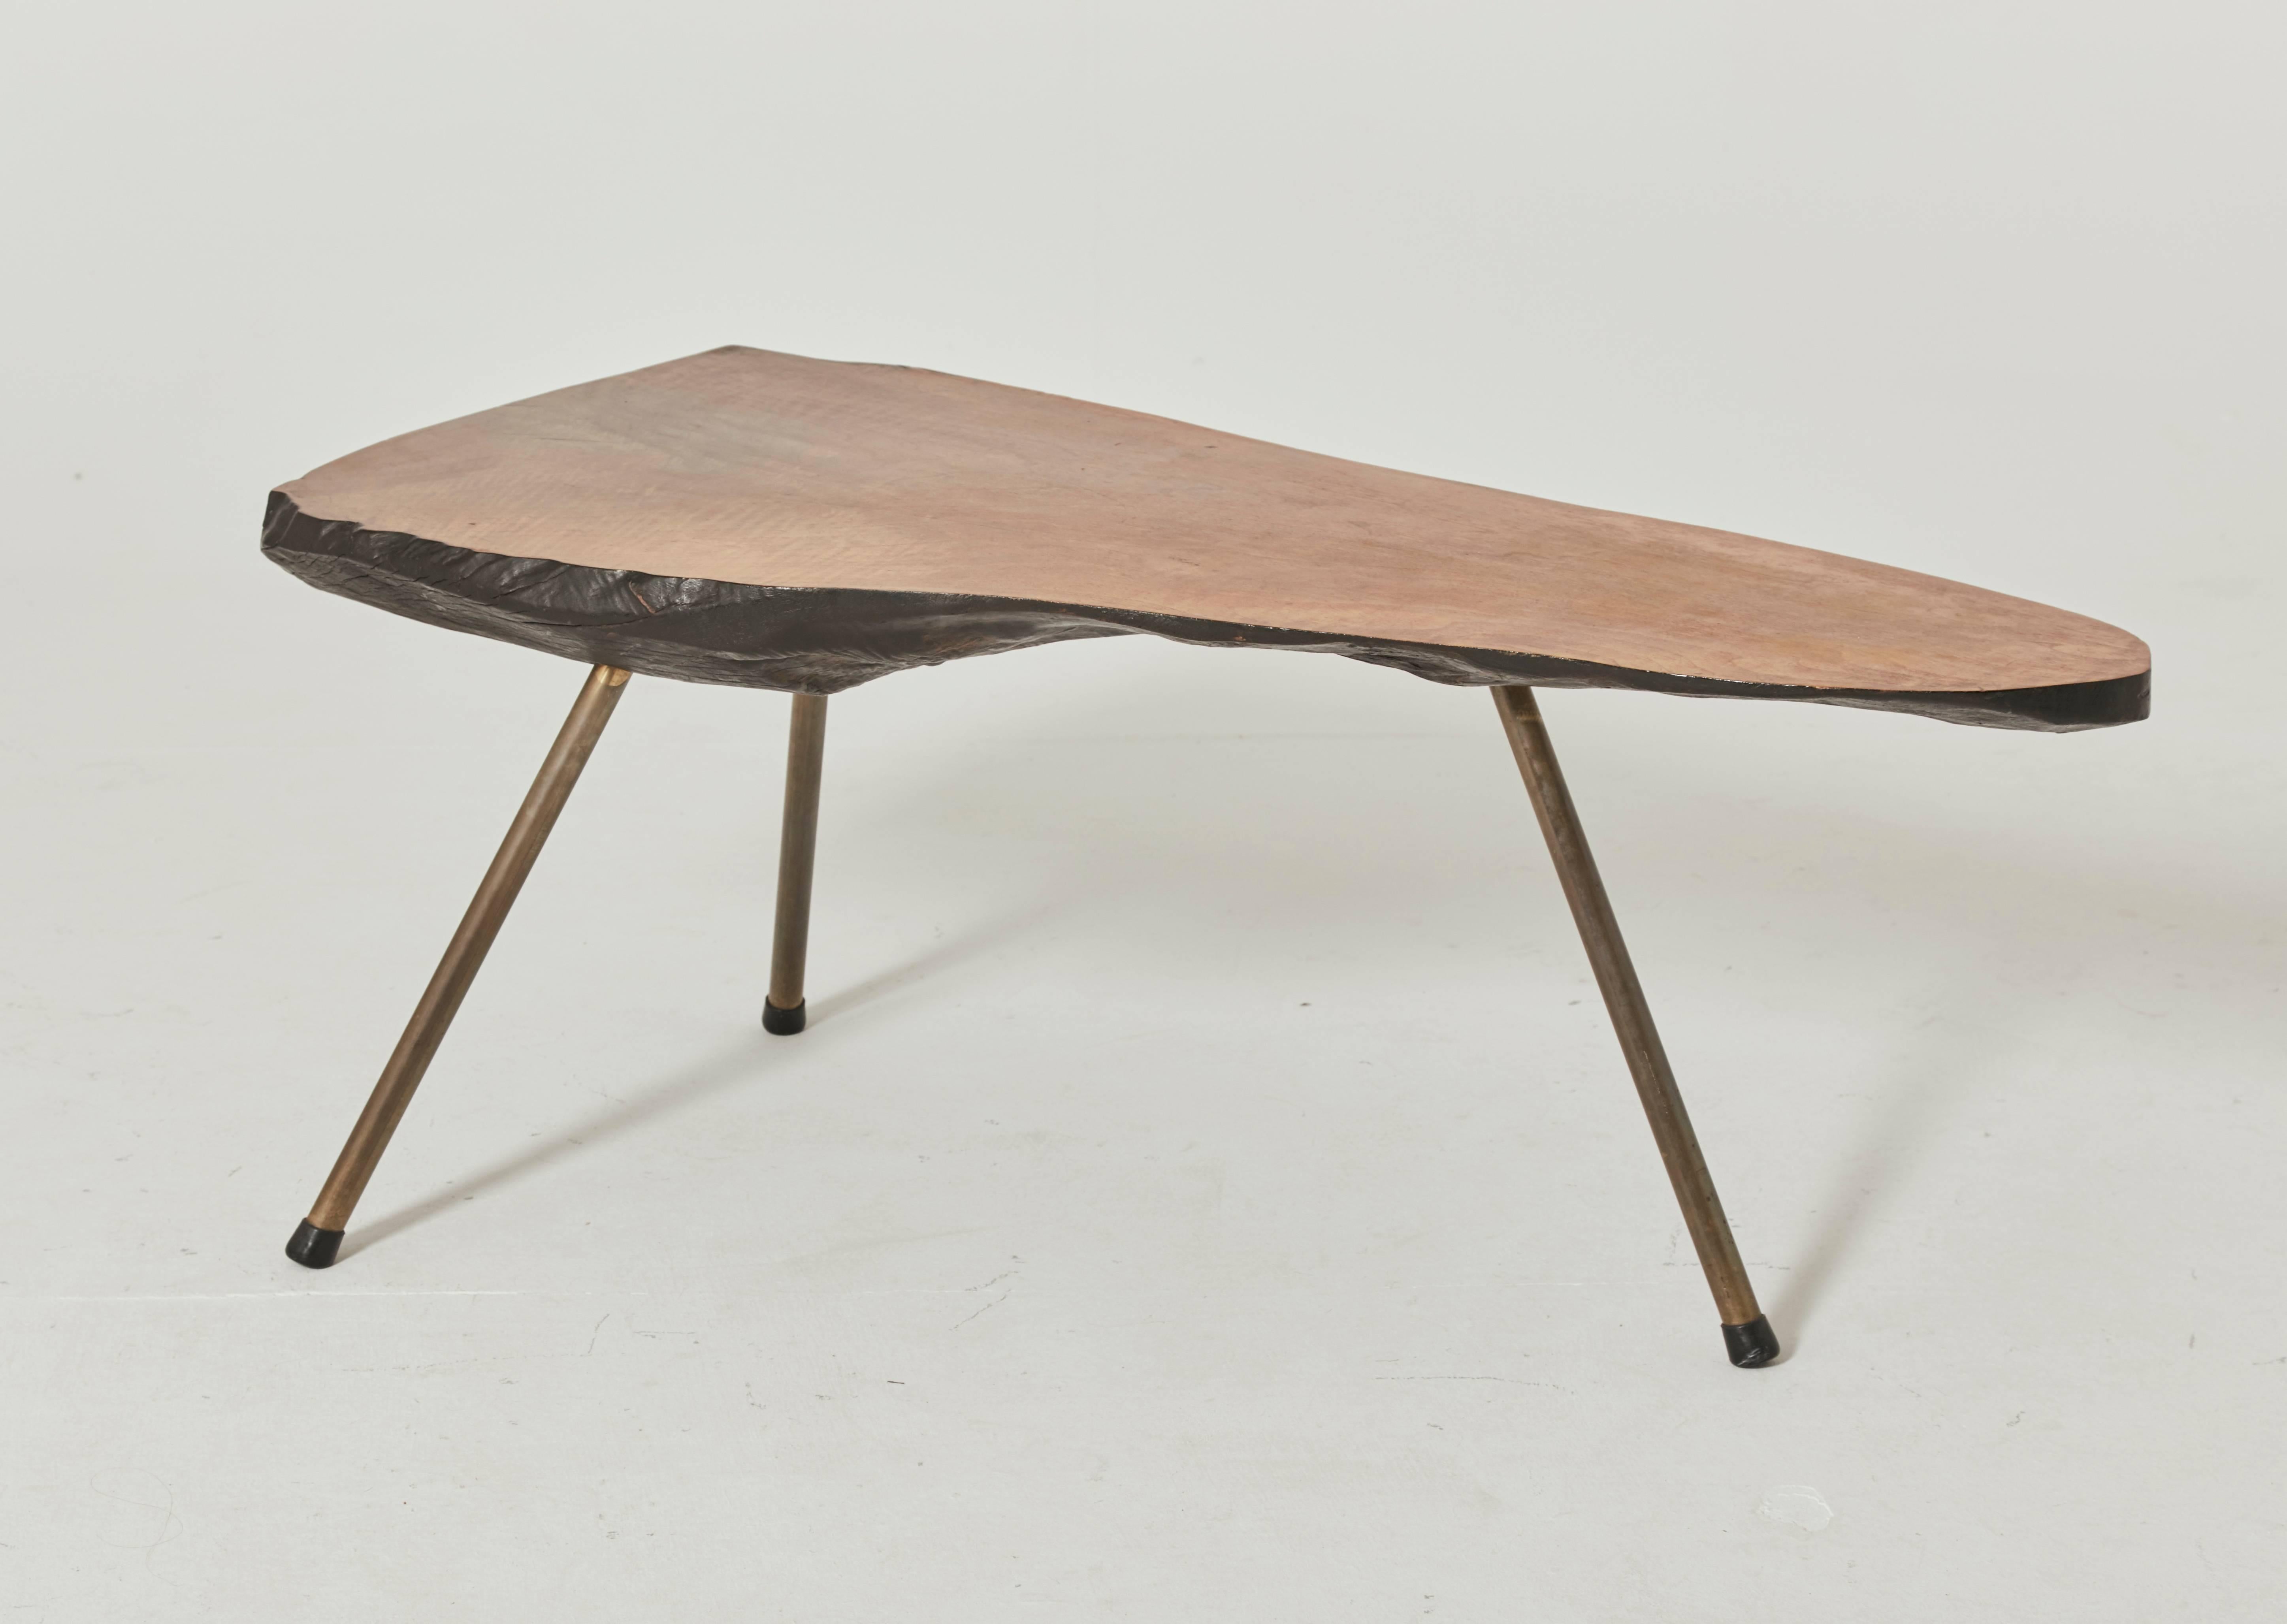 Austrian Large Midcentury Tree Trunk Table Attributed to Carl Auböck, Austria, 1950s